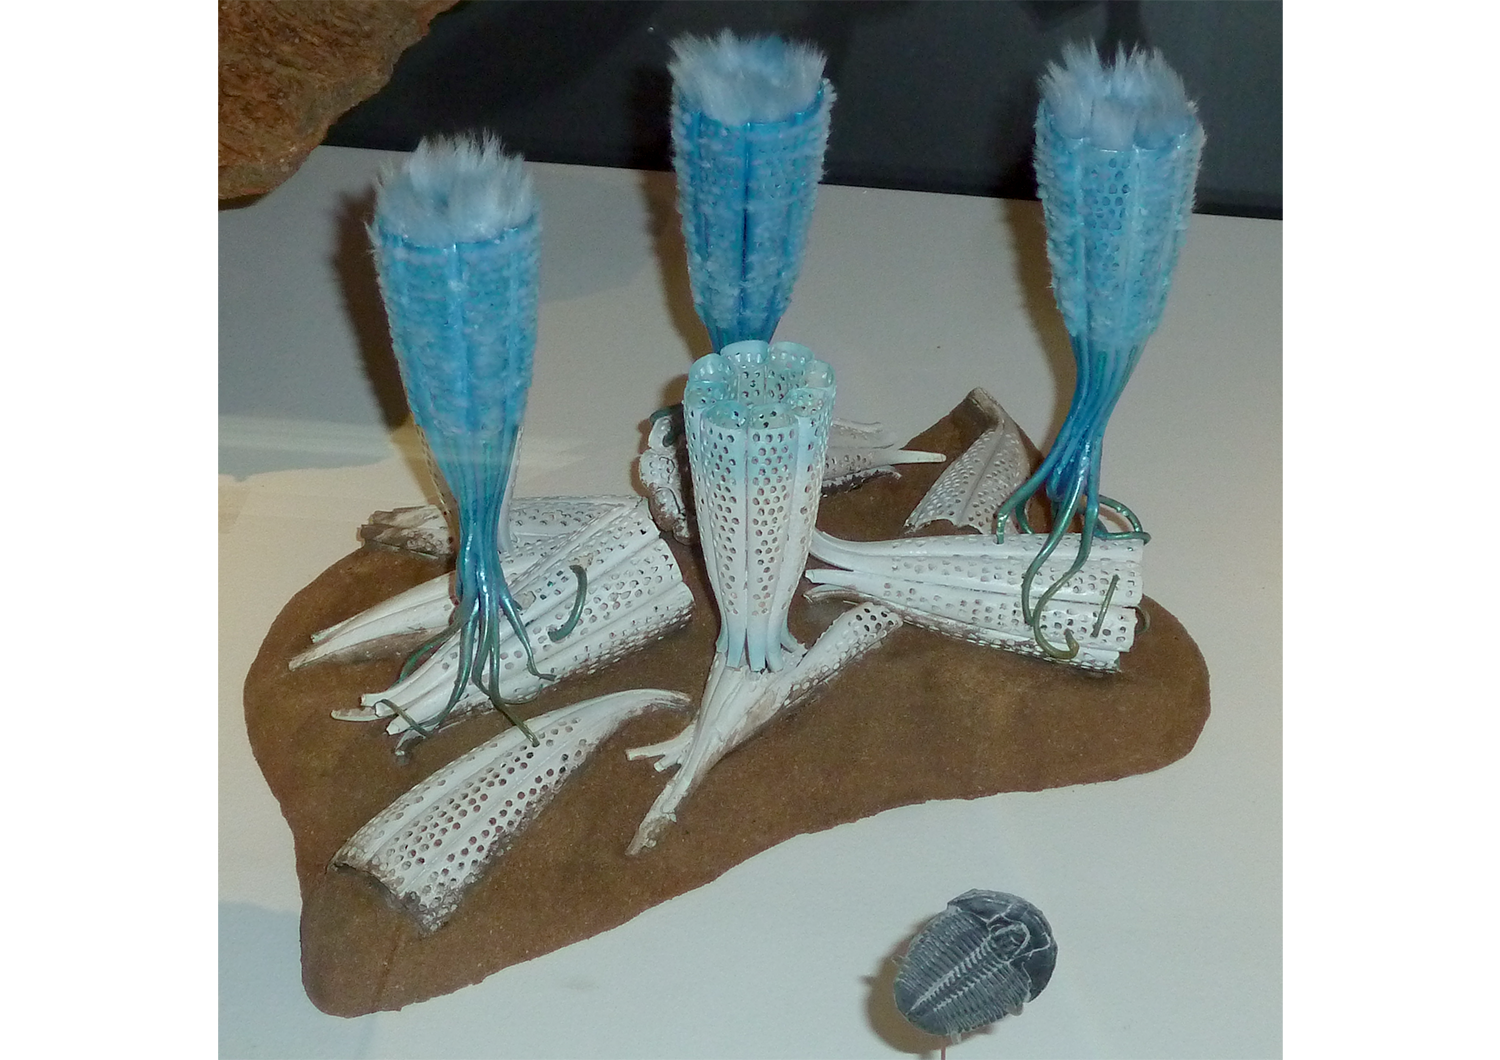 Photograph of archaeocyathid models on display at the Melbourne Museum, Australia.